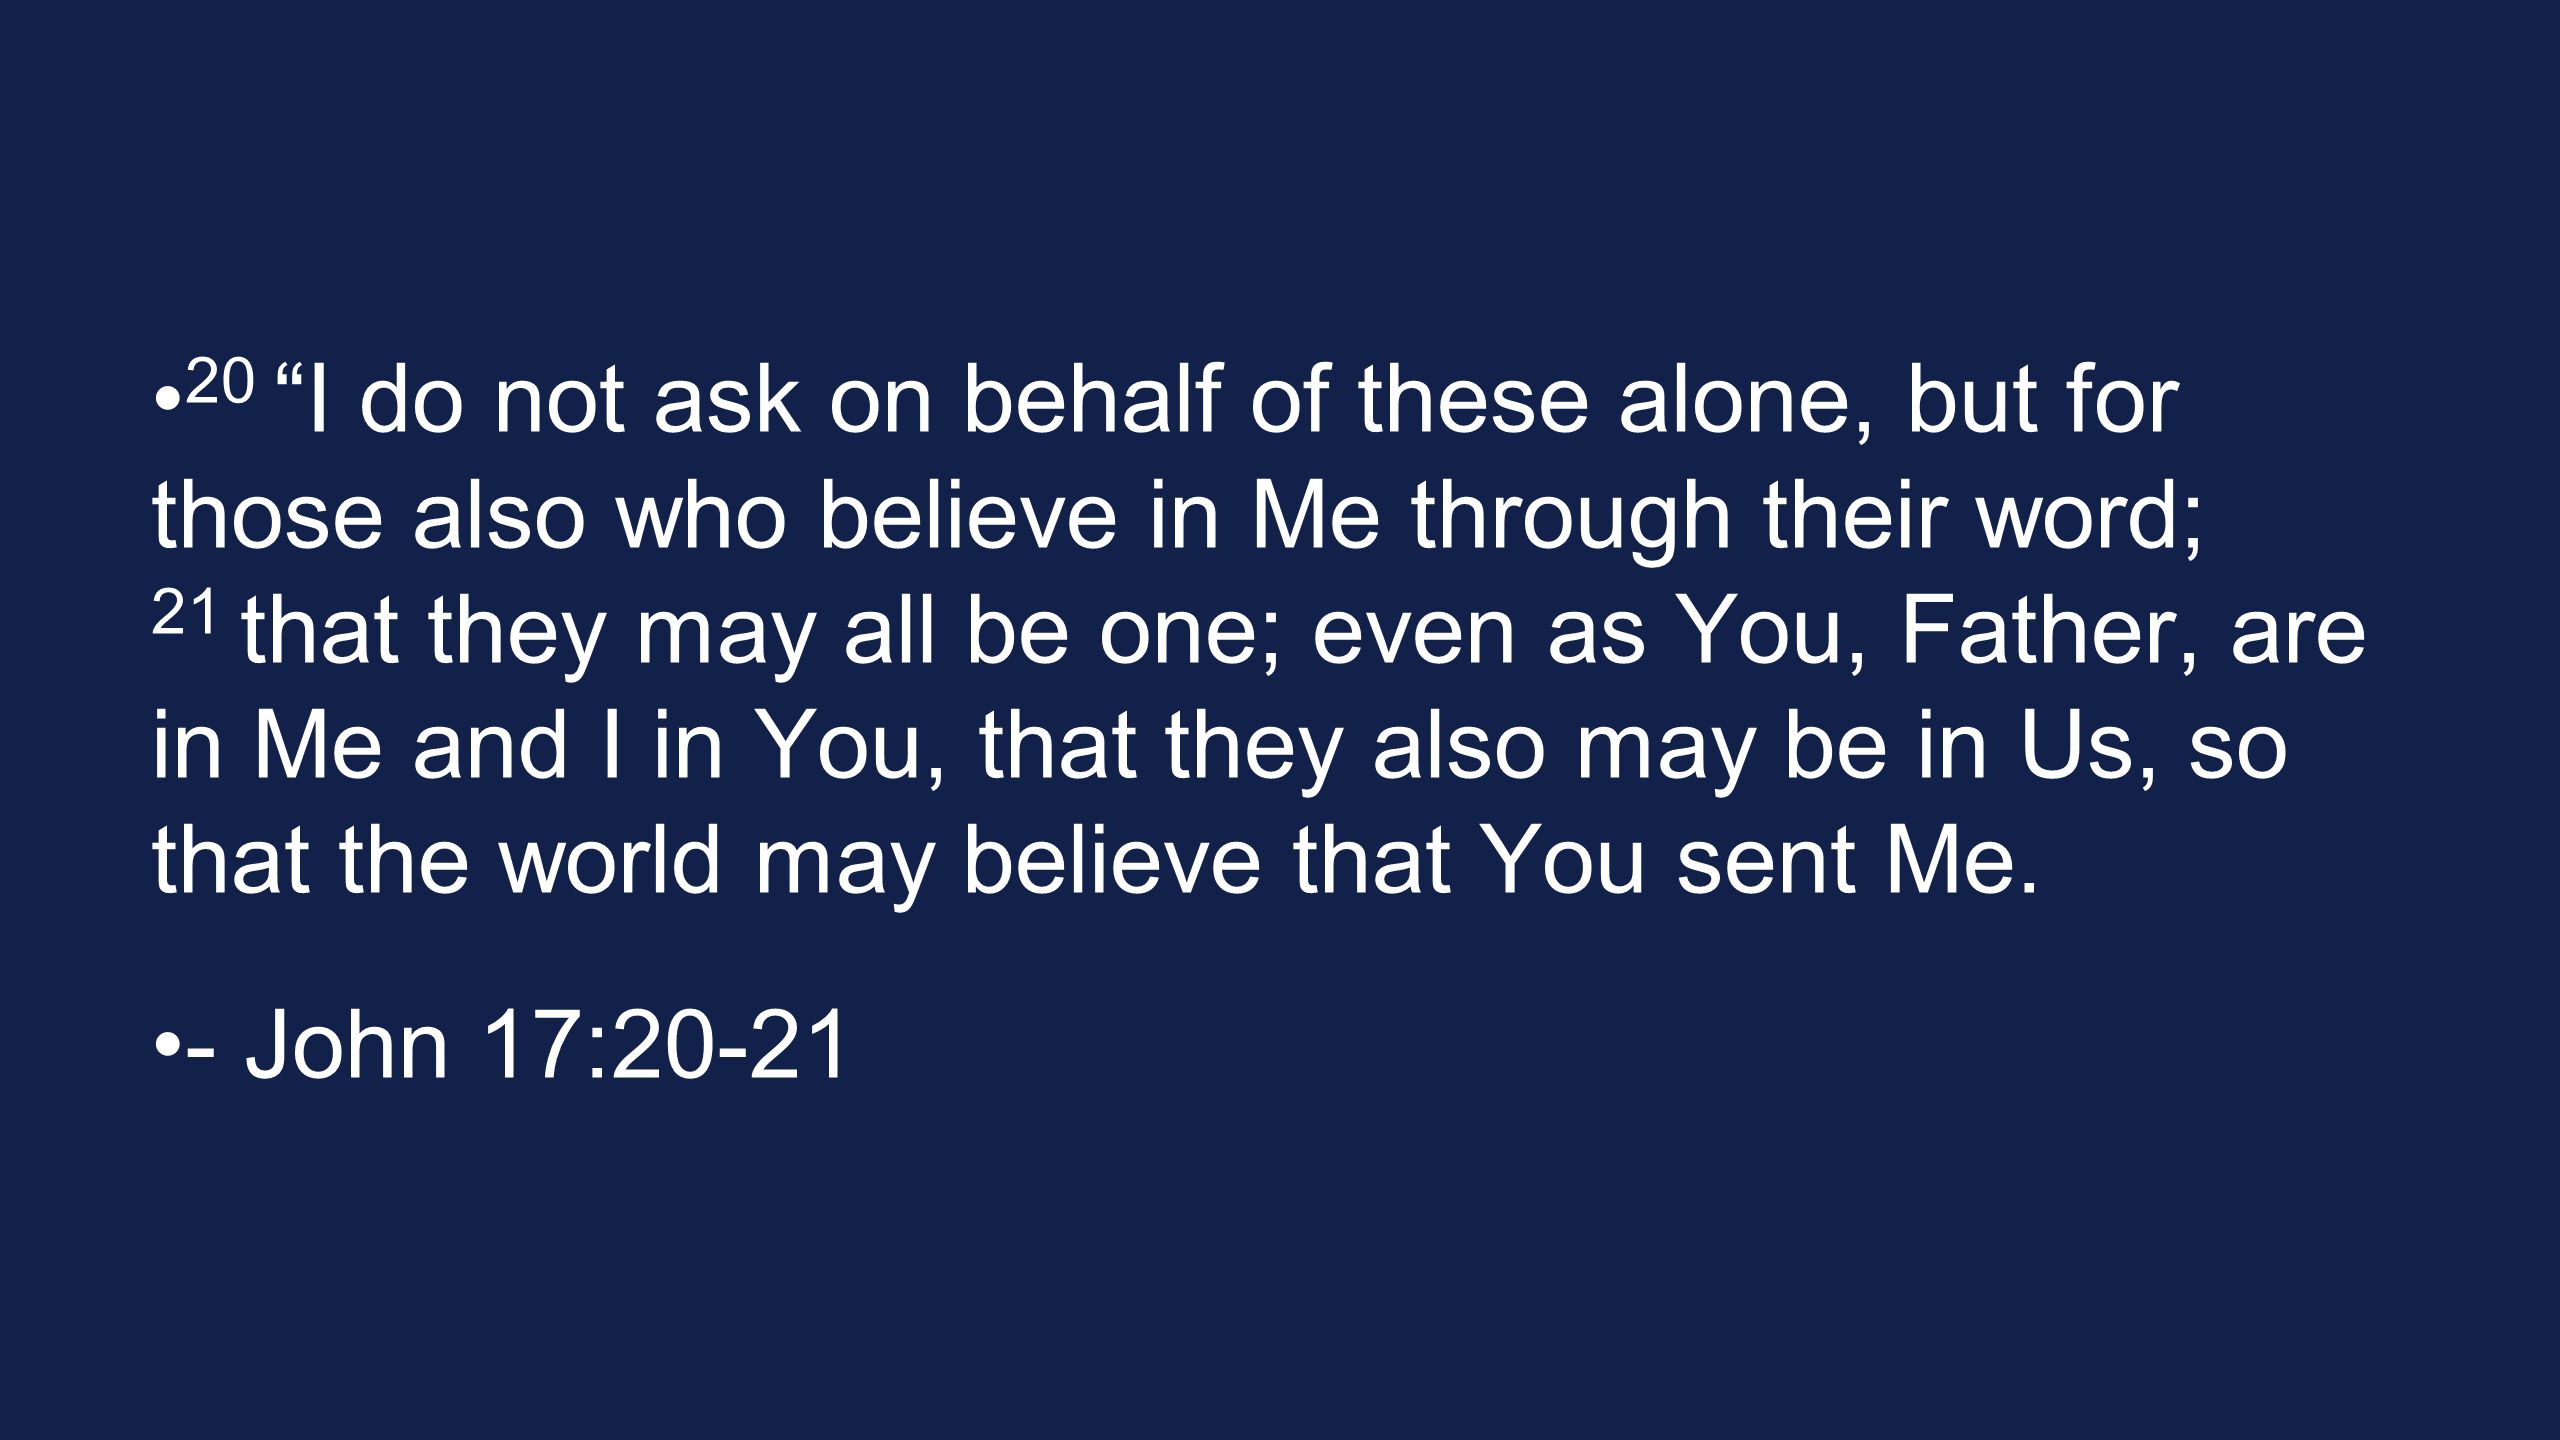 20 I do not ask on behalf of these alone, but for those also who believe in Me through their word; 21 that they may all be one; even as You, Father, are in Me and I in You, that they also may be in Us, so that the world may believe that You sent Me.